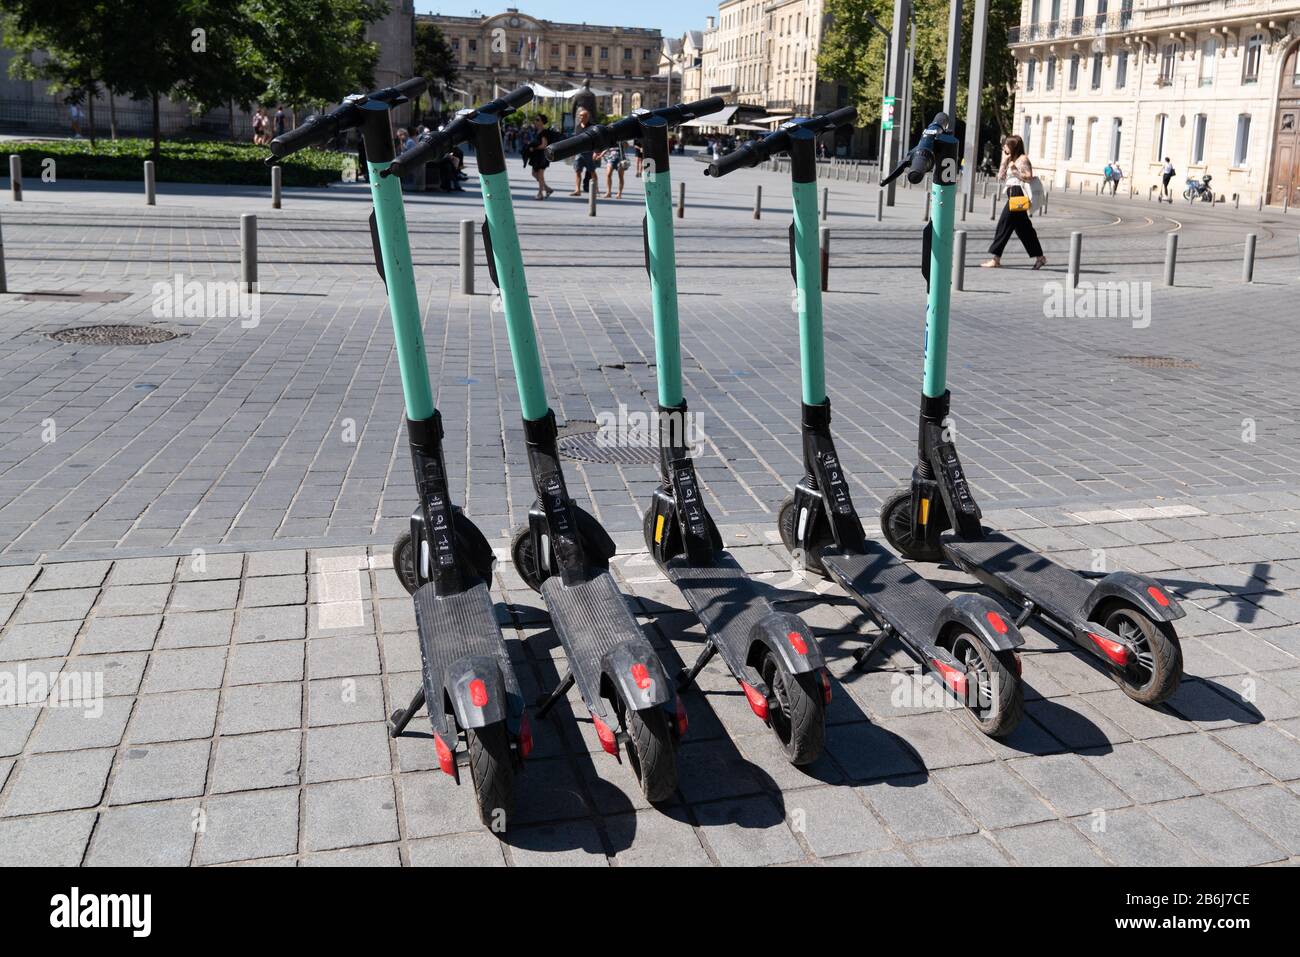 Bordeaux , Aquitaine / France - 11 07 2019 : electric scooters parked on street of city center Stock Photo